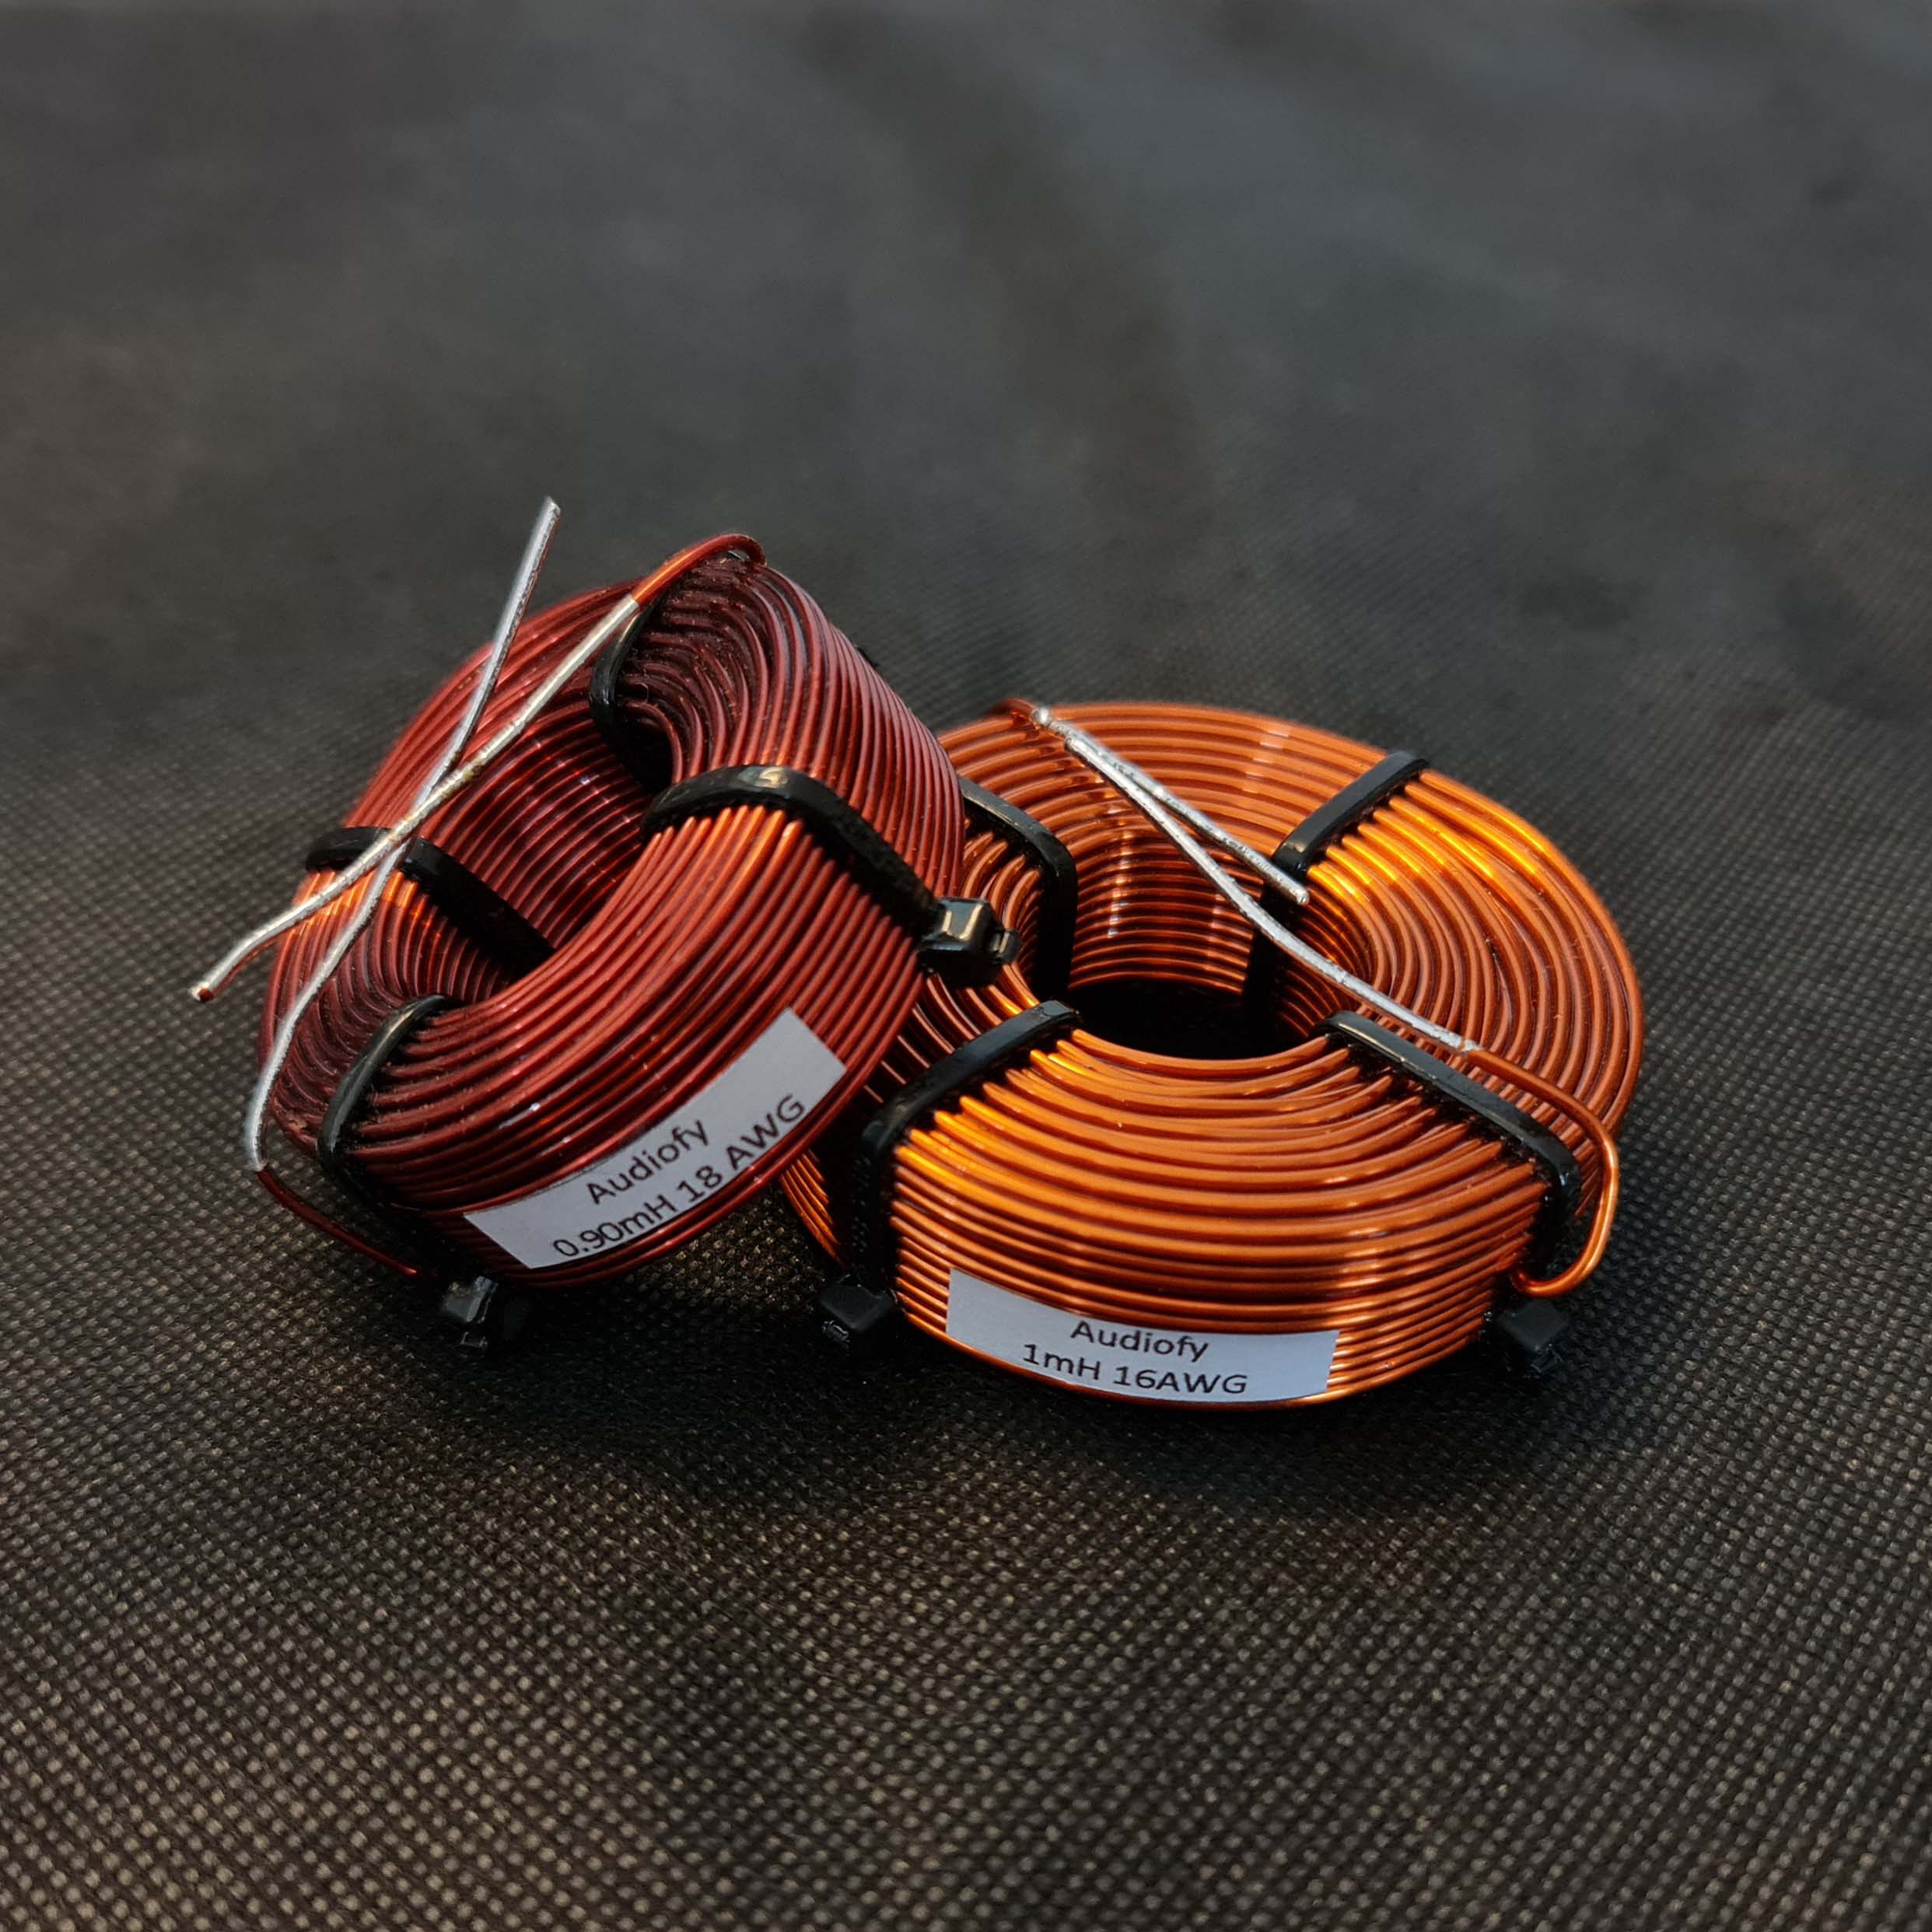 Audiofy 0.70mH 16 AWG Air Core Crossover Inductor